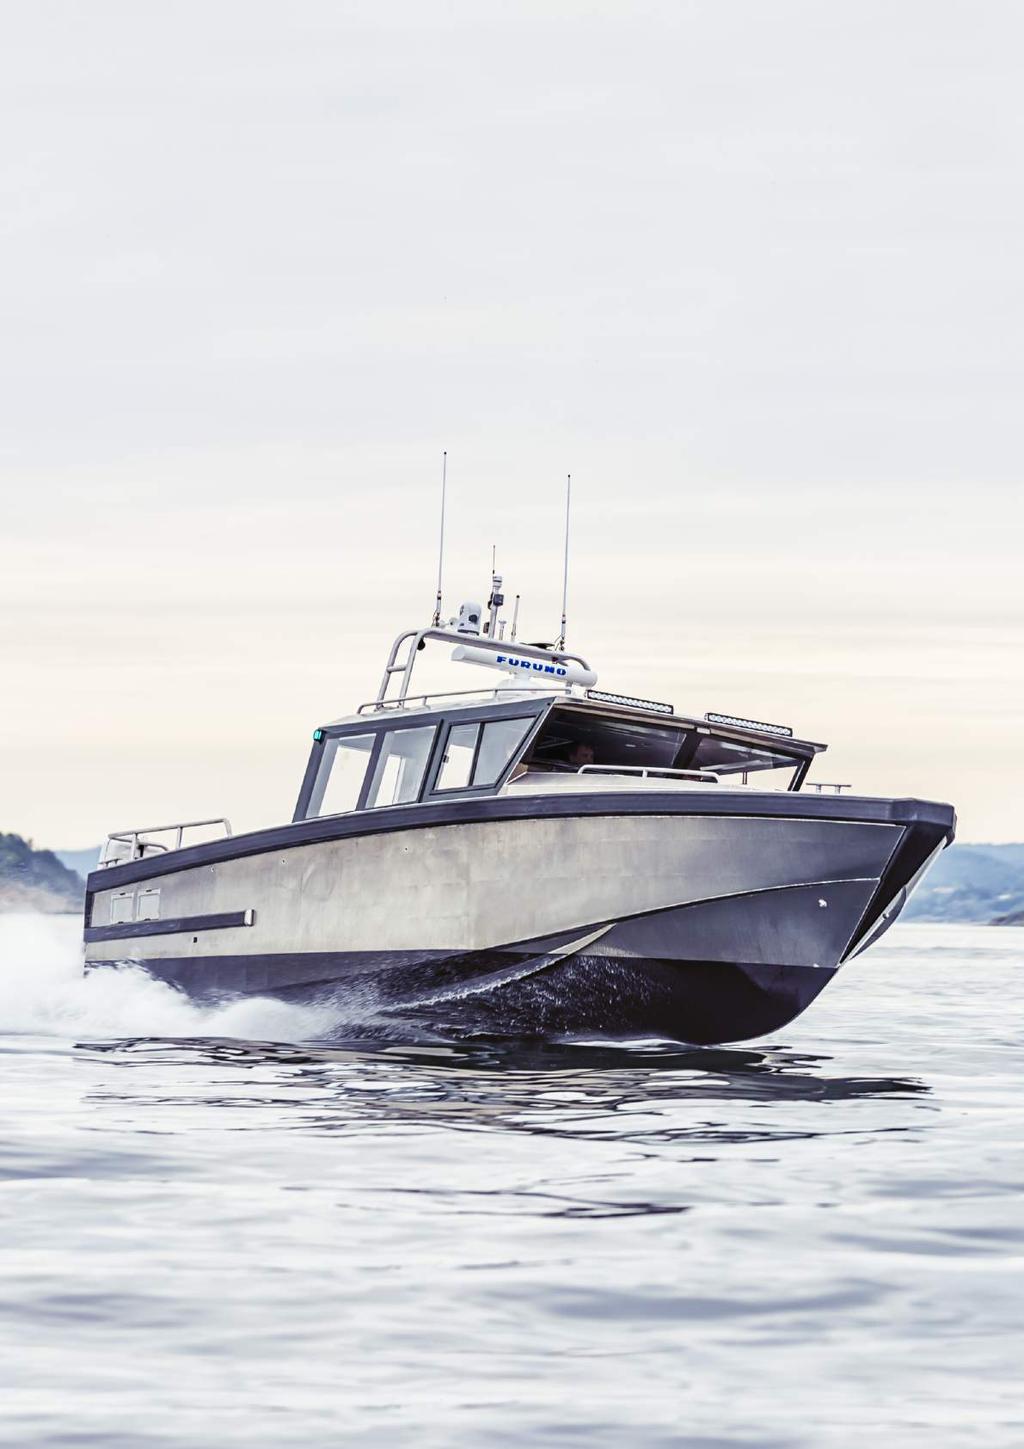 Swede Ship Marine builds professional and exclusive boats for the most demanding